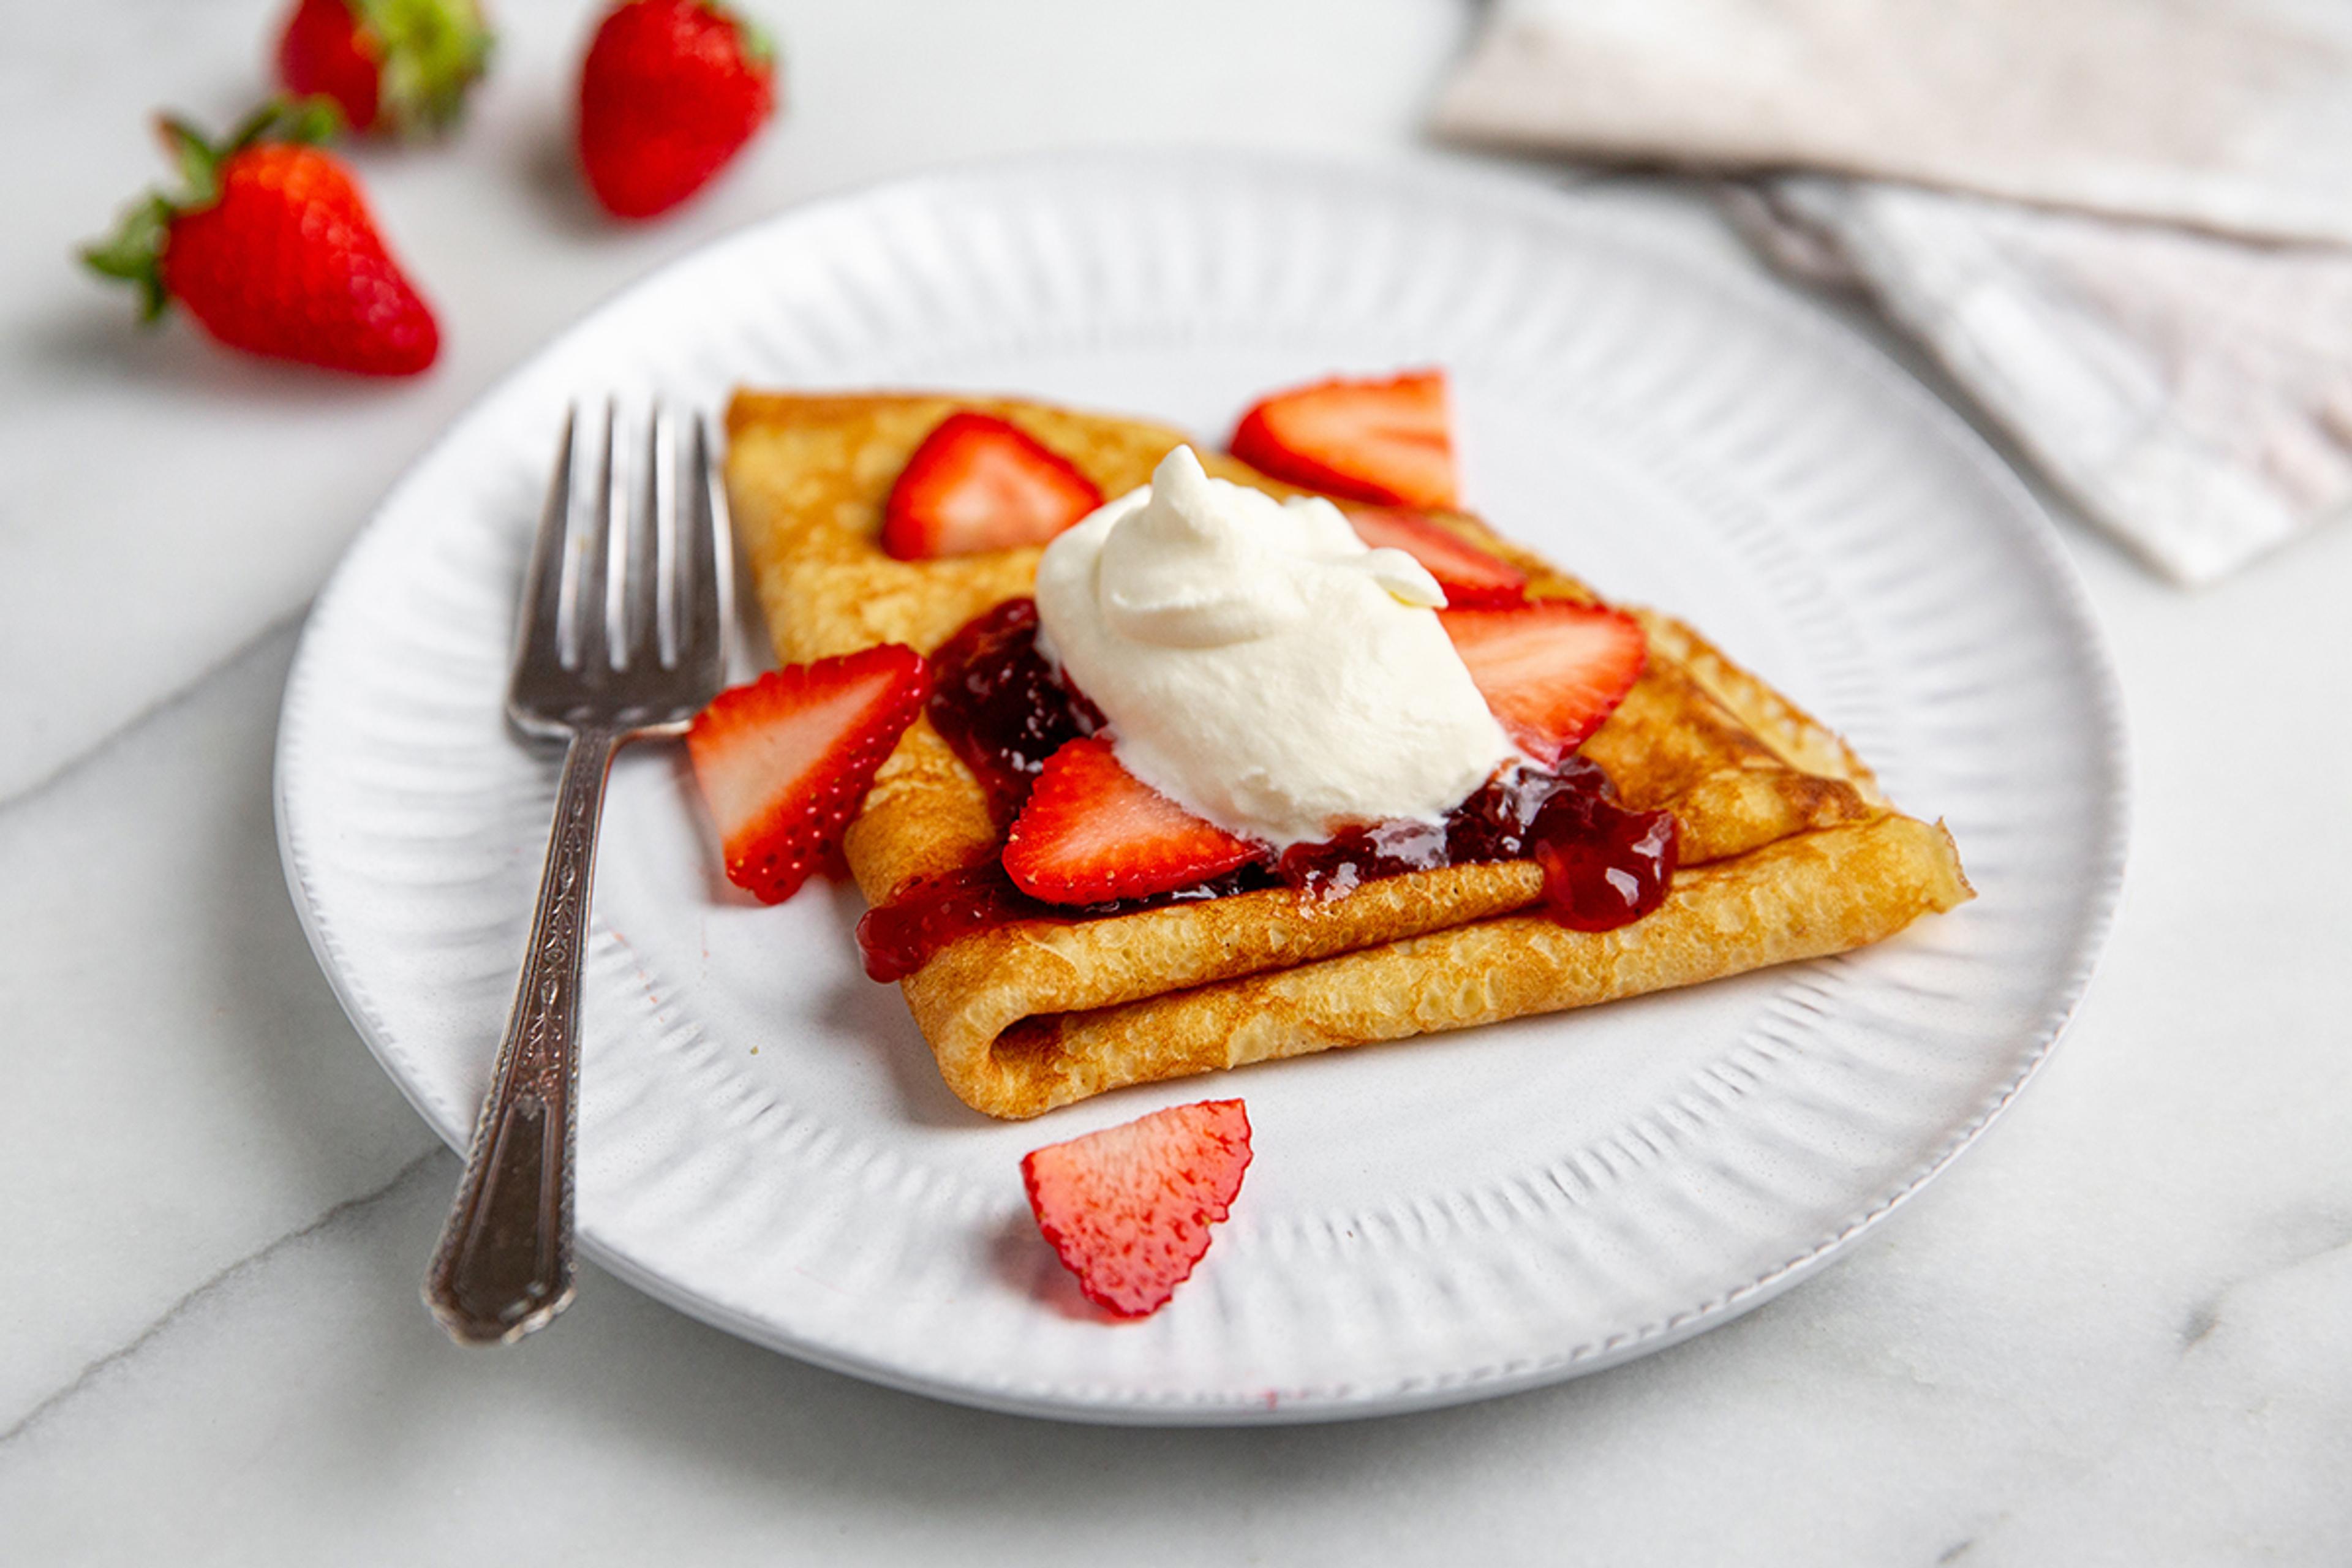 Sweet crepes topped with fresh homemade whipped cream, strawberries and jam.